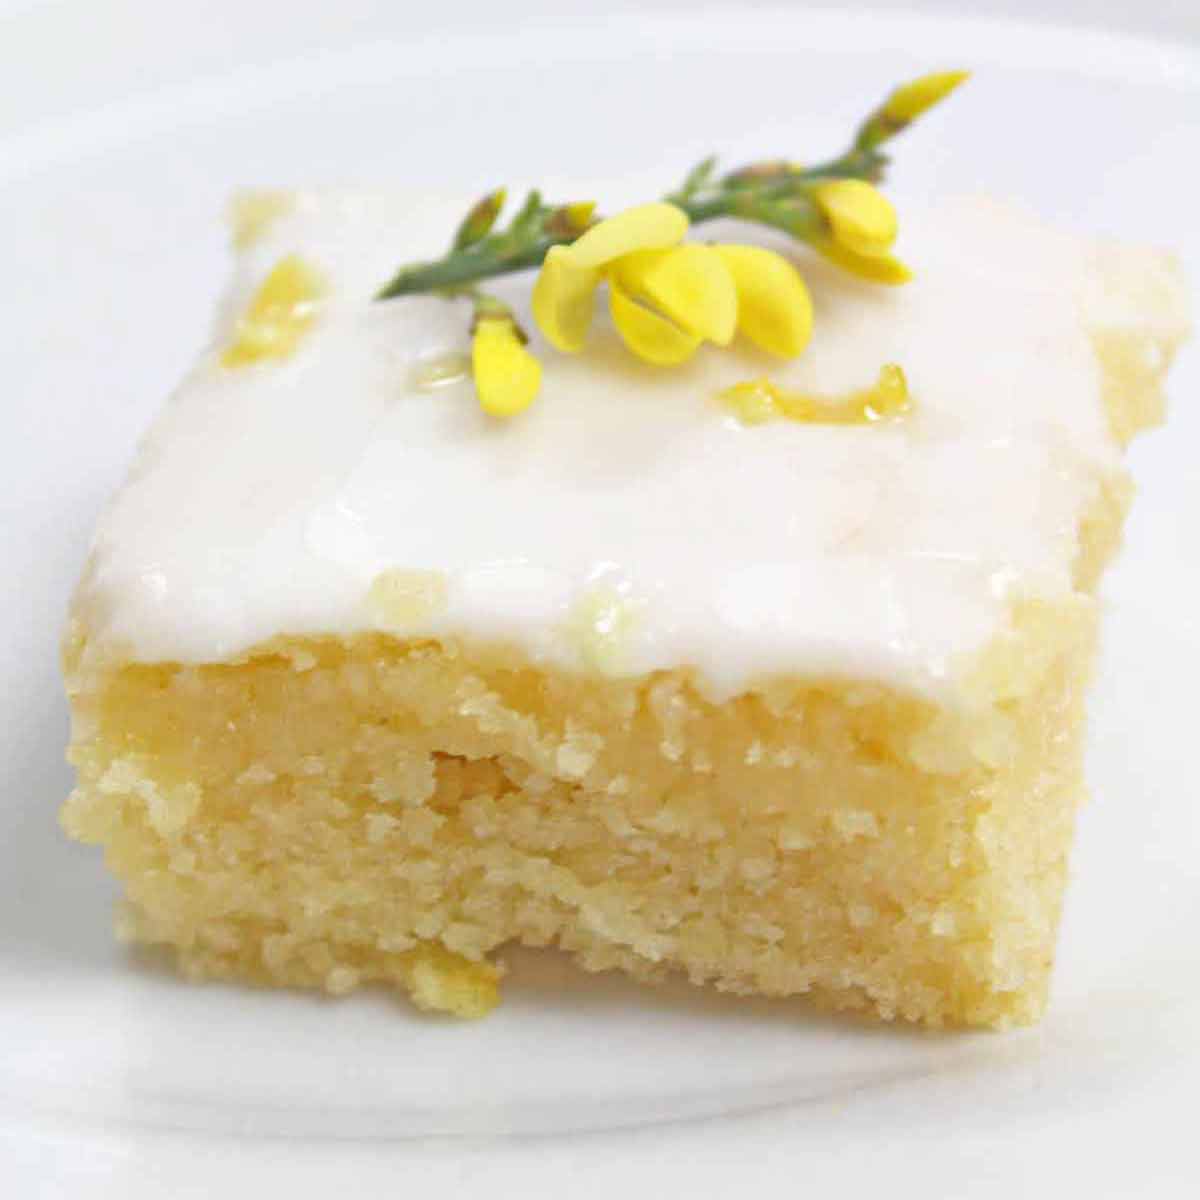 Slice Of Eggless Lemon Drizzle Cake On A Plate